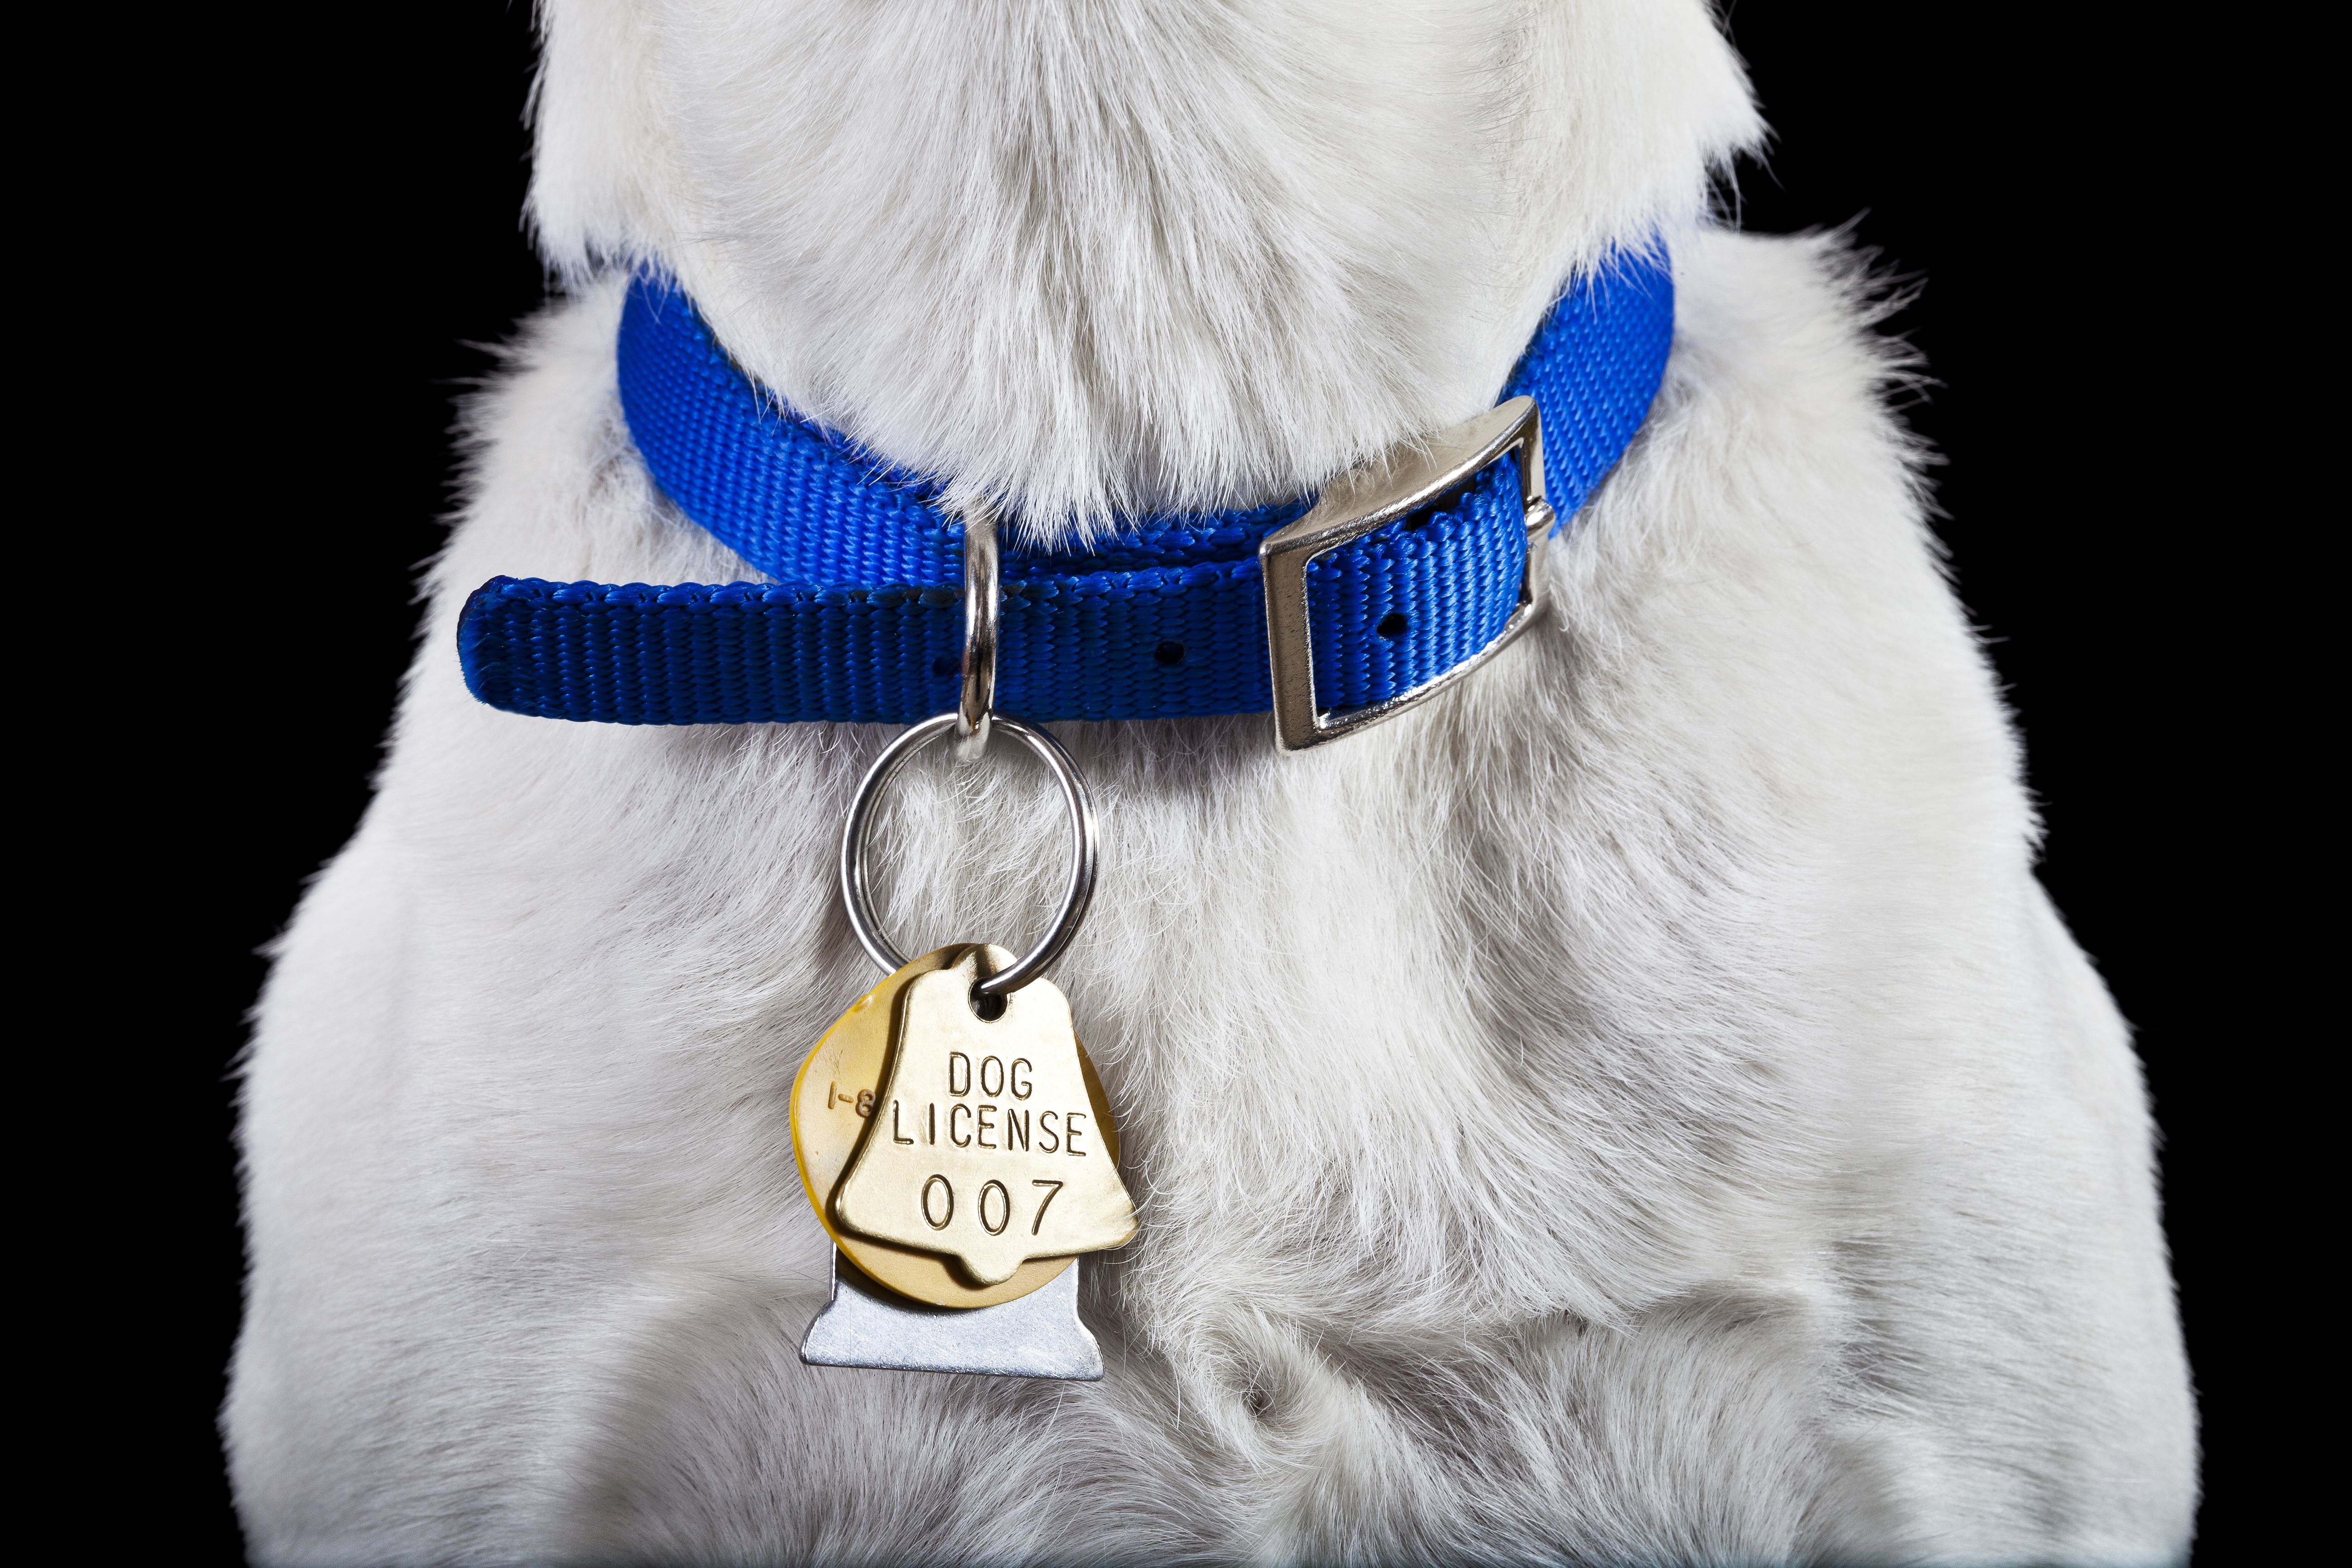 Dog collar with license